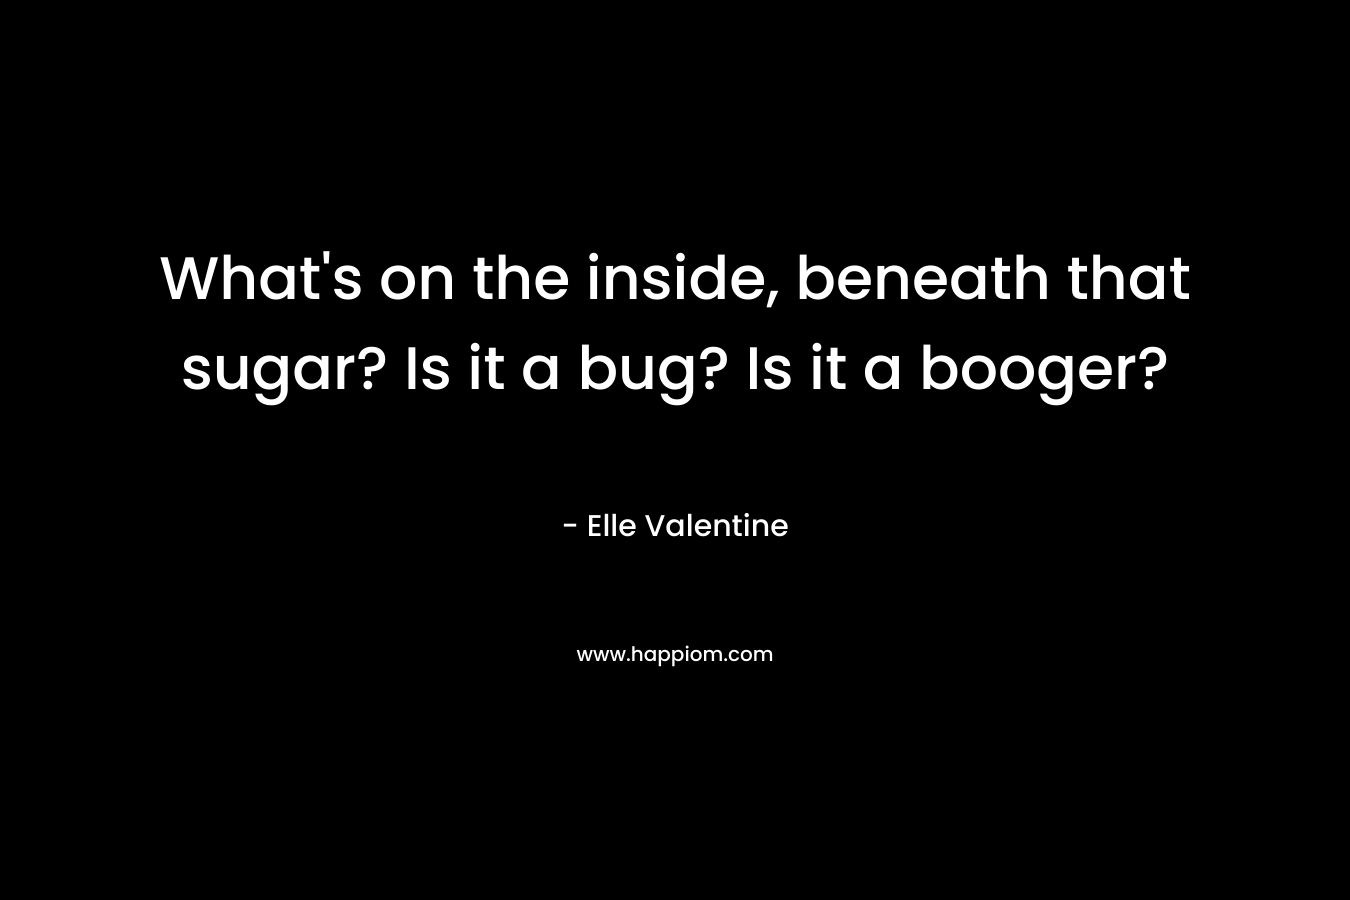 What’s on the inside, beneath that sugar? Is it a bug? Is it a booger? – Elle Valentine